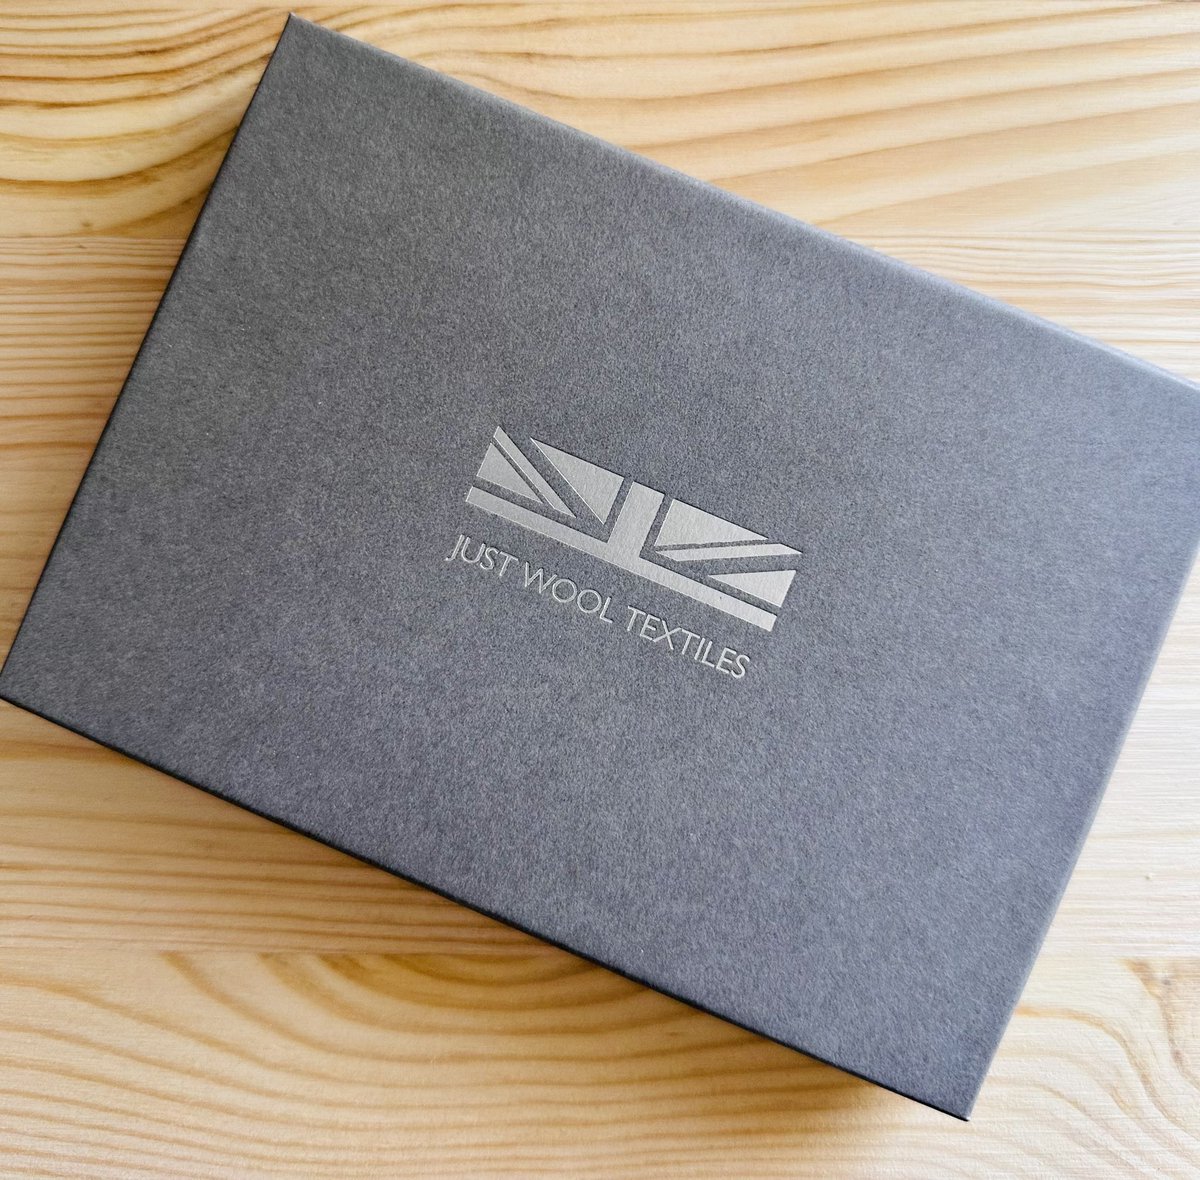 Handwoven & hand-finished pocket squares, ties and bow ties always arrived in a smart branded box. 

Each creation wrapped in tissue paper with a care/information card & a sprig of dried lavender.

#formalwear #slowfashion #noplastic #britishwool #handmade #MHHSBD